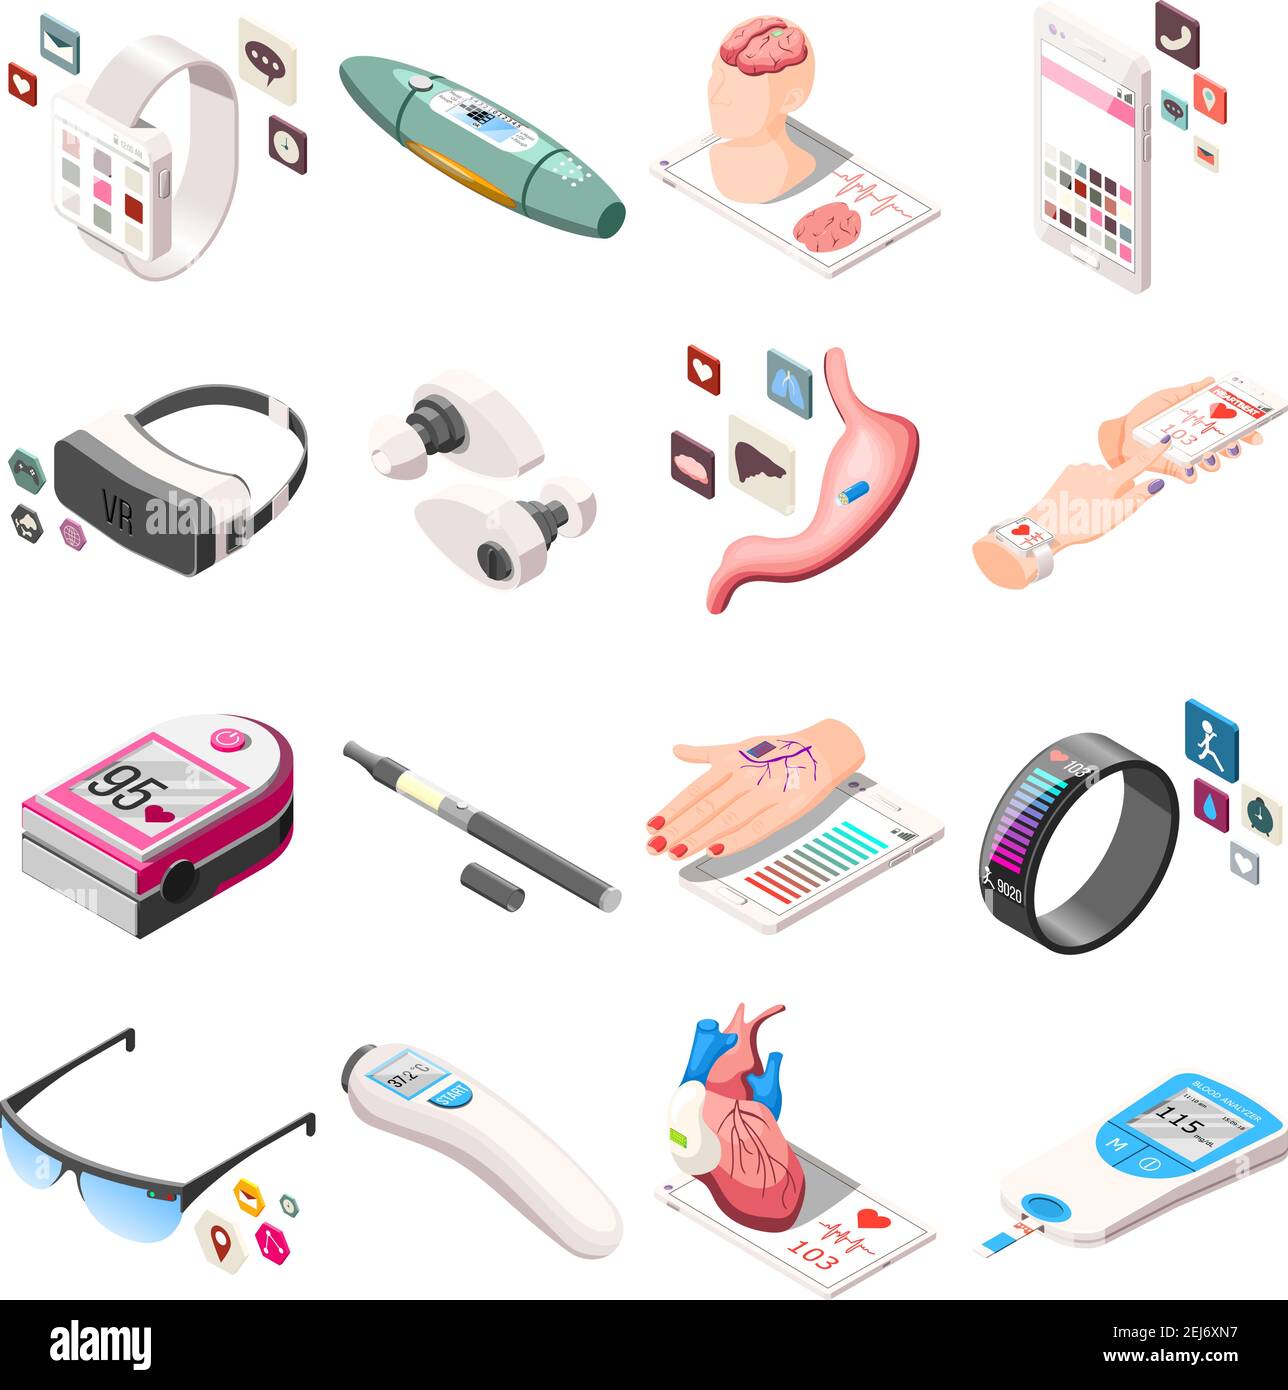 Portable electronics in medicine and life including vr headset, vape, fitness bracelet isometric icons isolated vector illustration Stock Vector